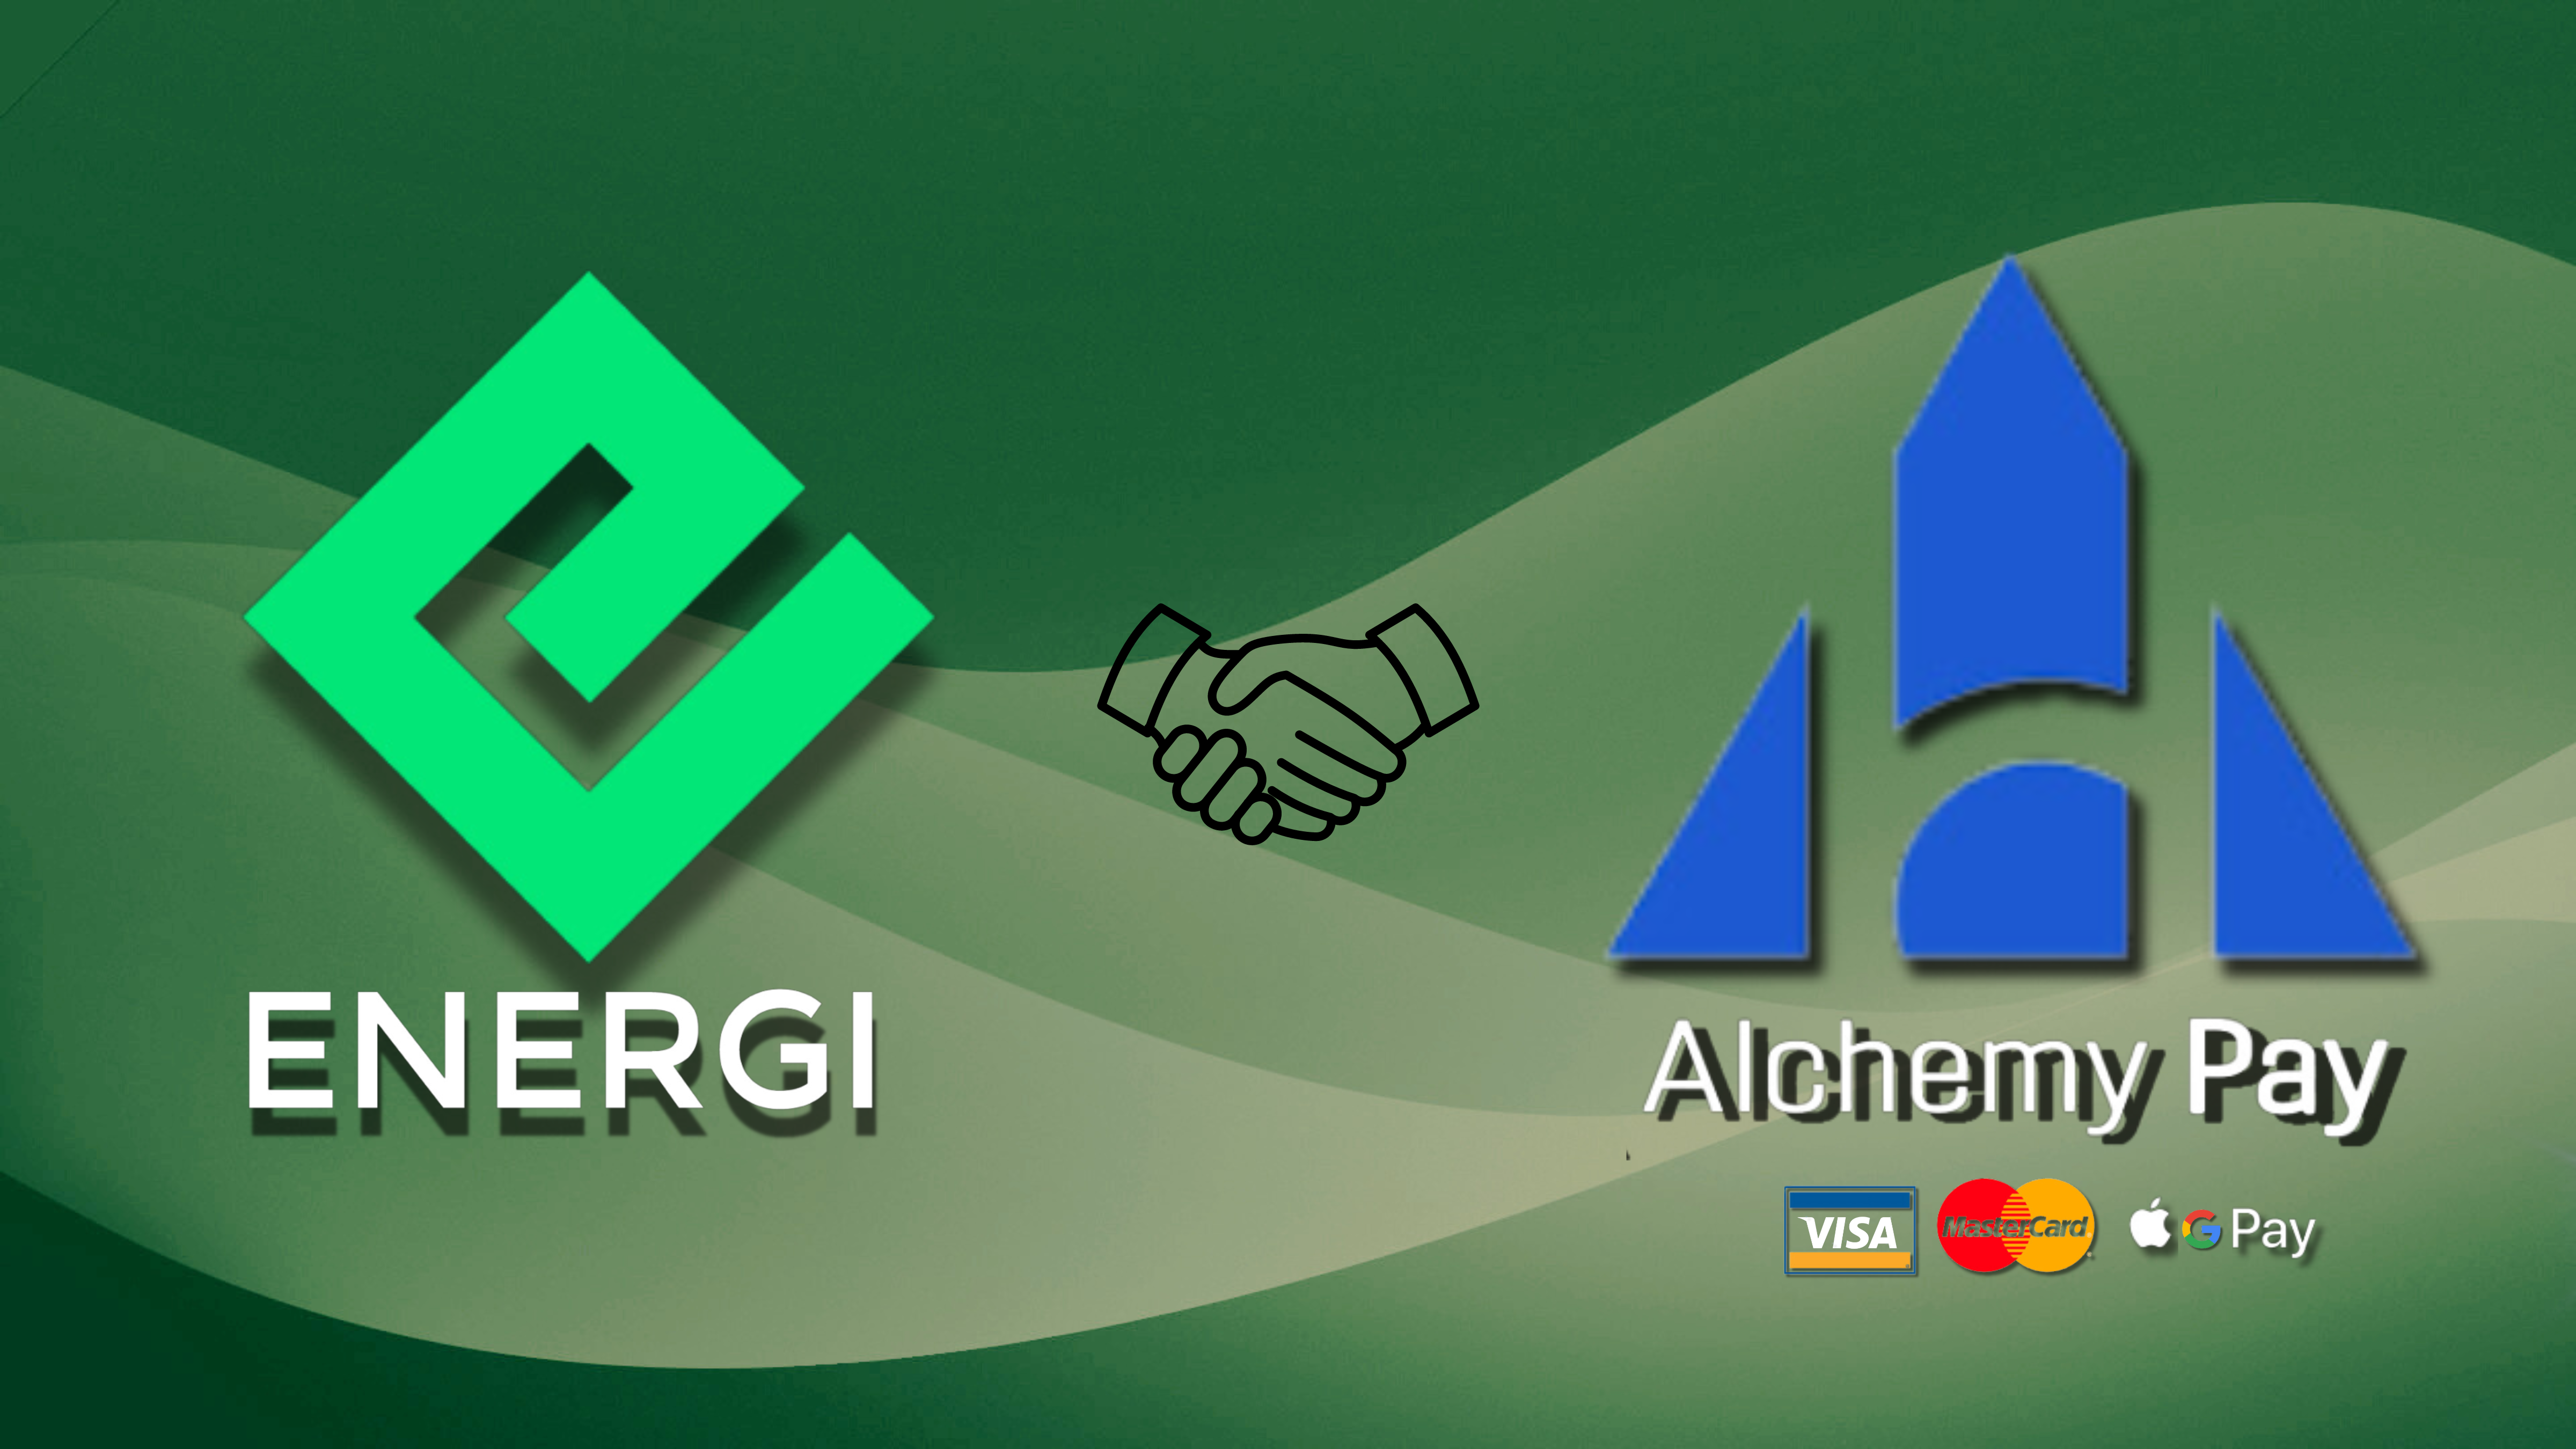 Energi Partners with Alchemy Pay: Access NRG Easily with Your Local Fiat Currency